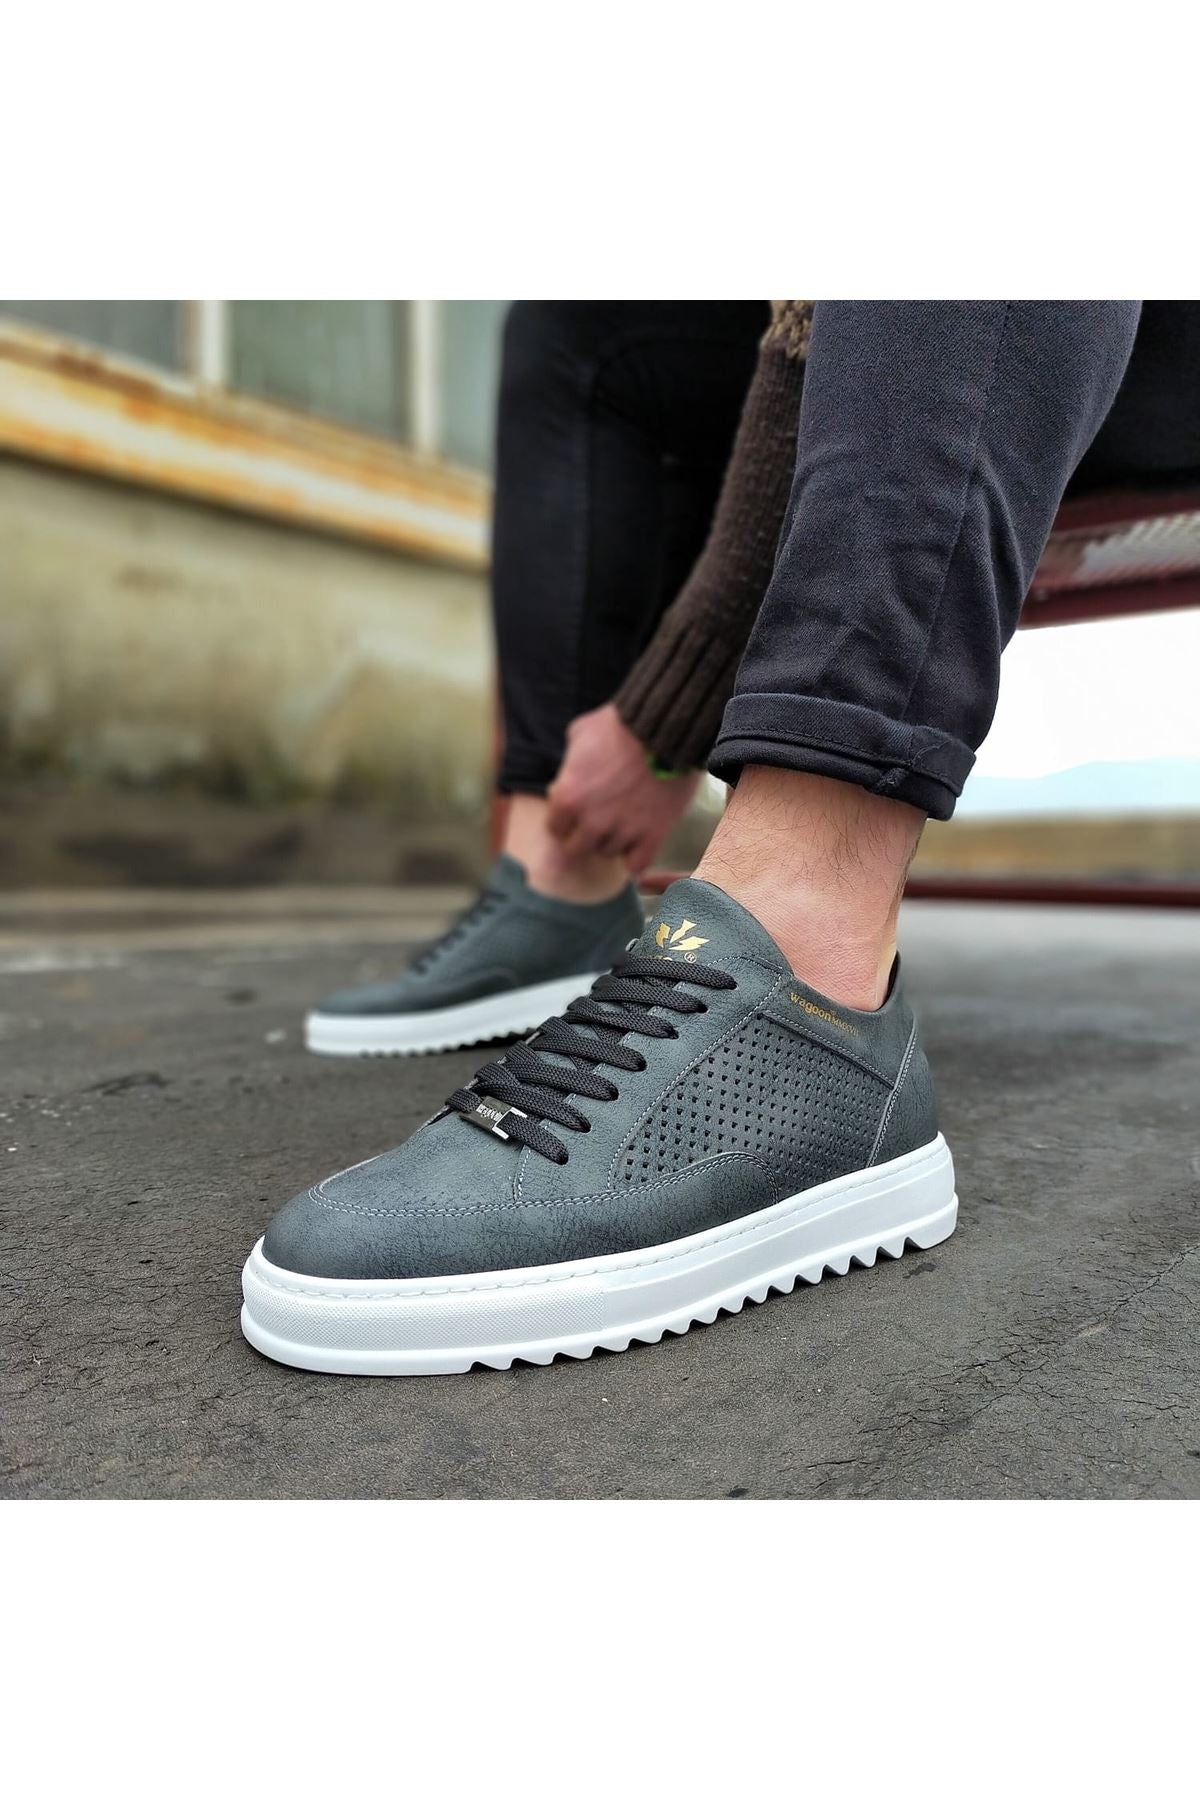 WG505 Gray Men Casual Shoes - STREETMODE ™